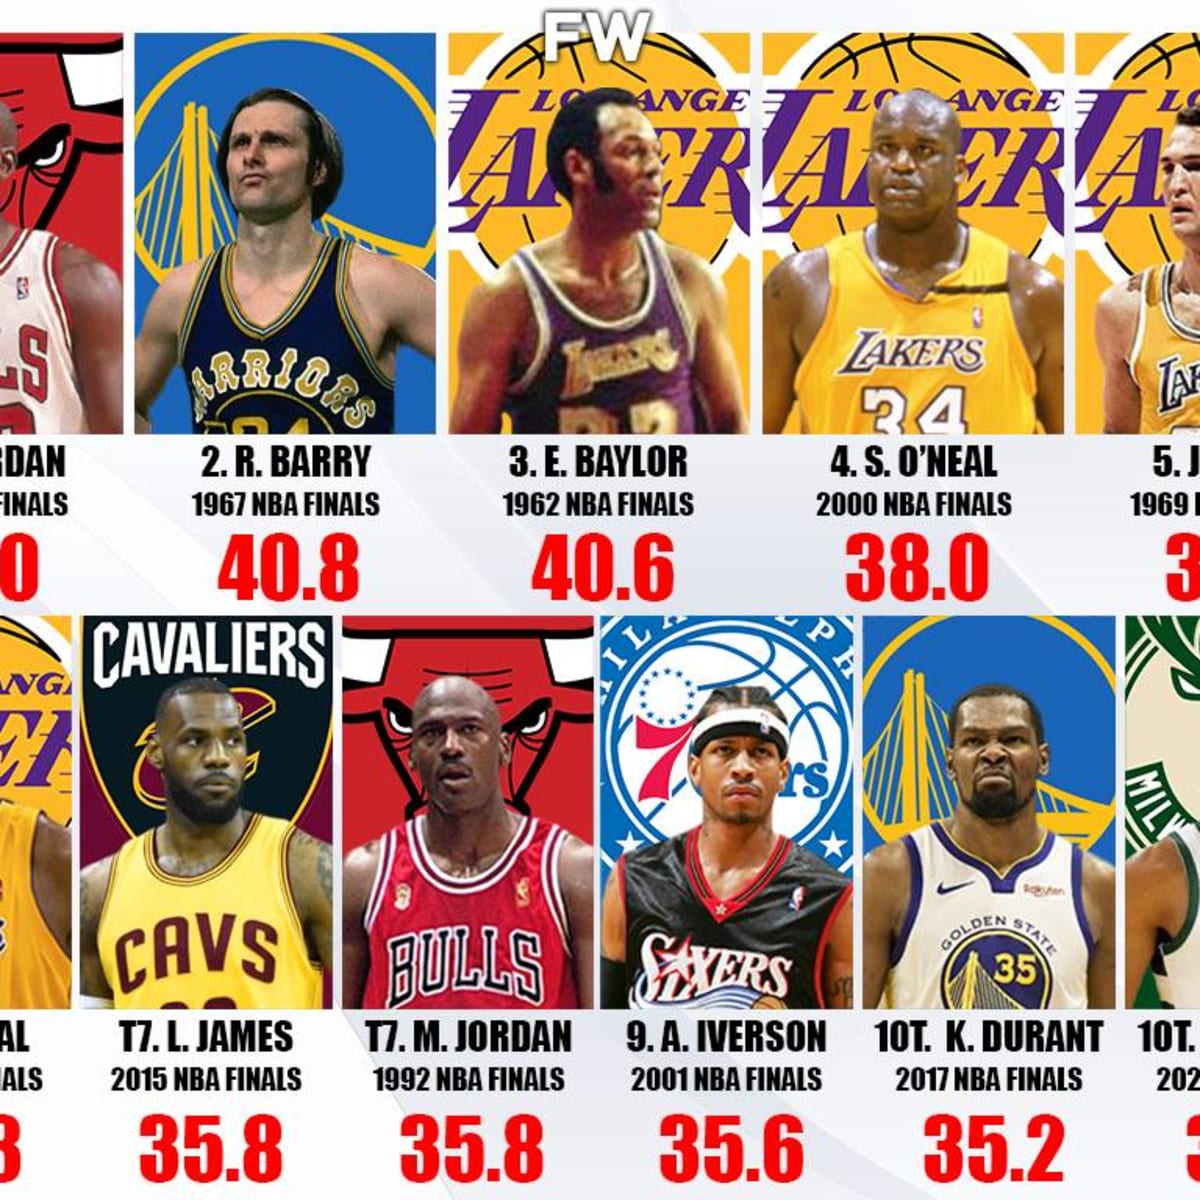 The Highest-Scoring NBA Game of All Time in the Regular Season